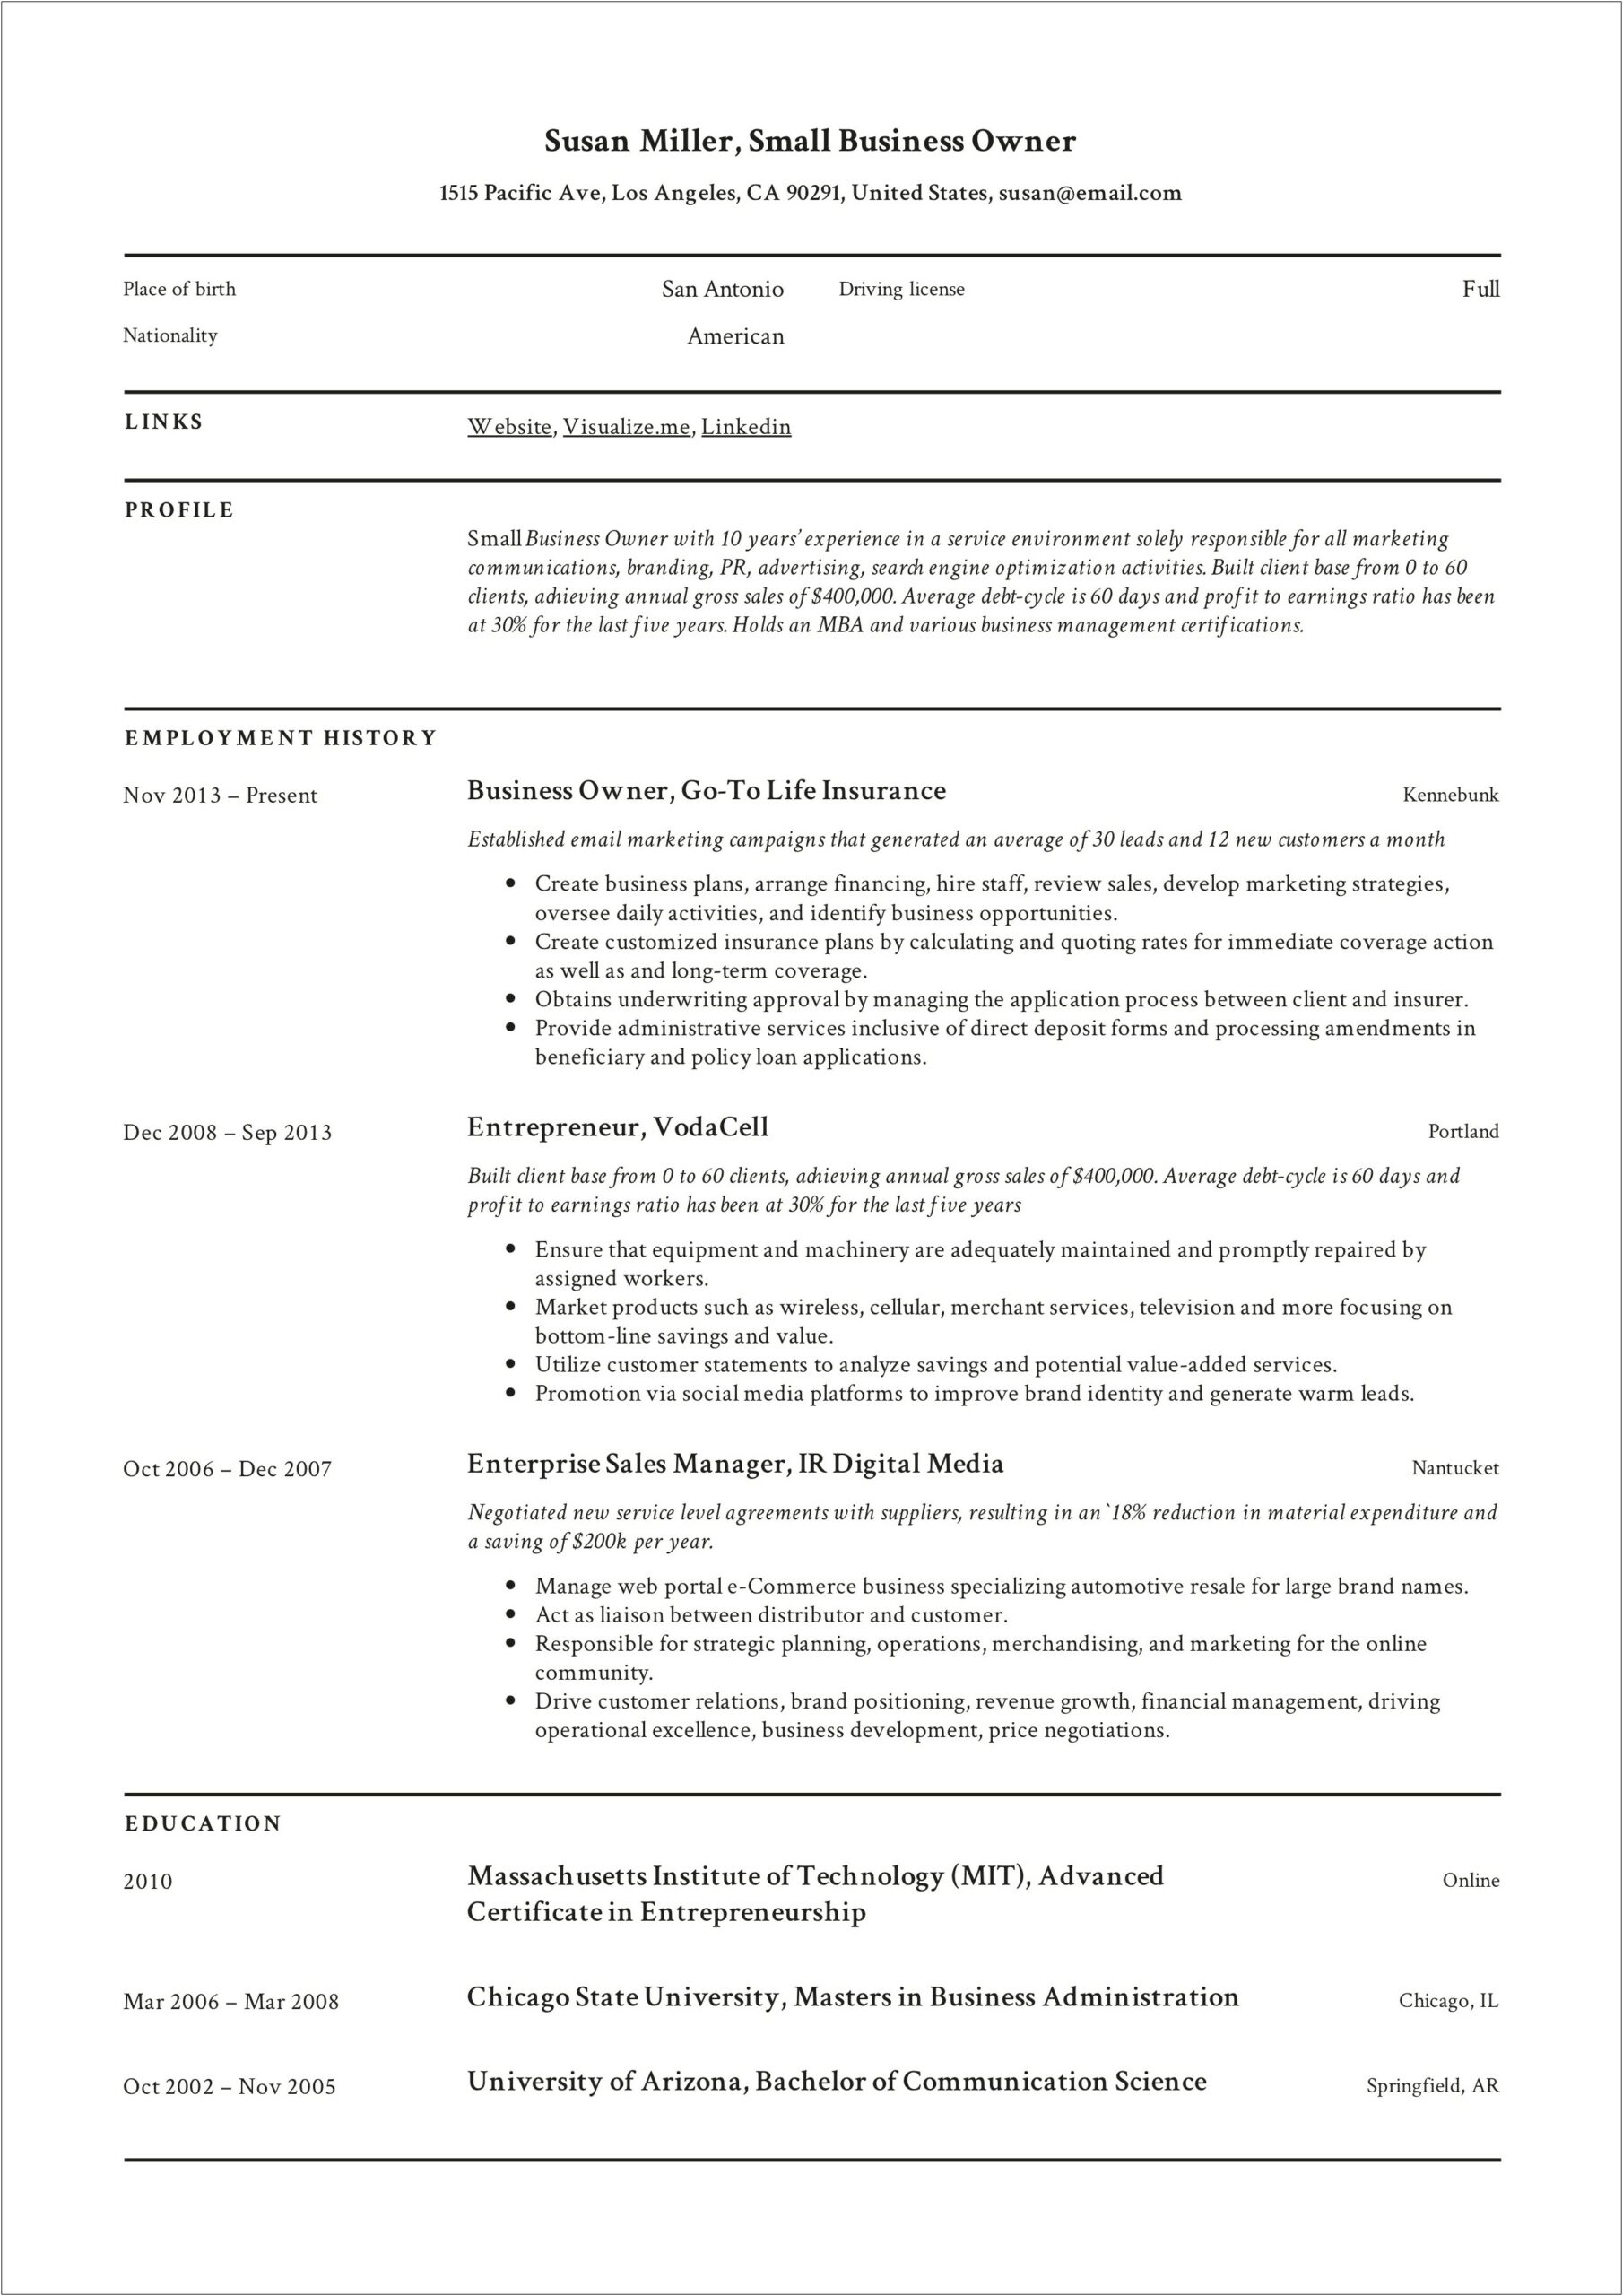 List Of Small Business Skill For Resume